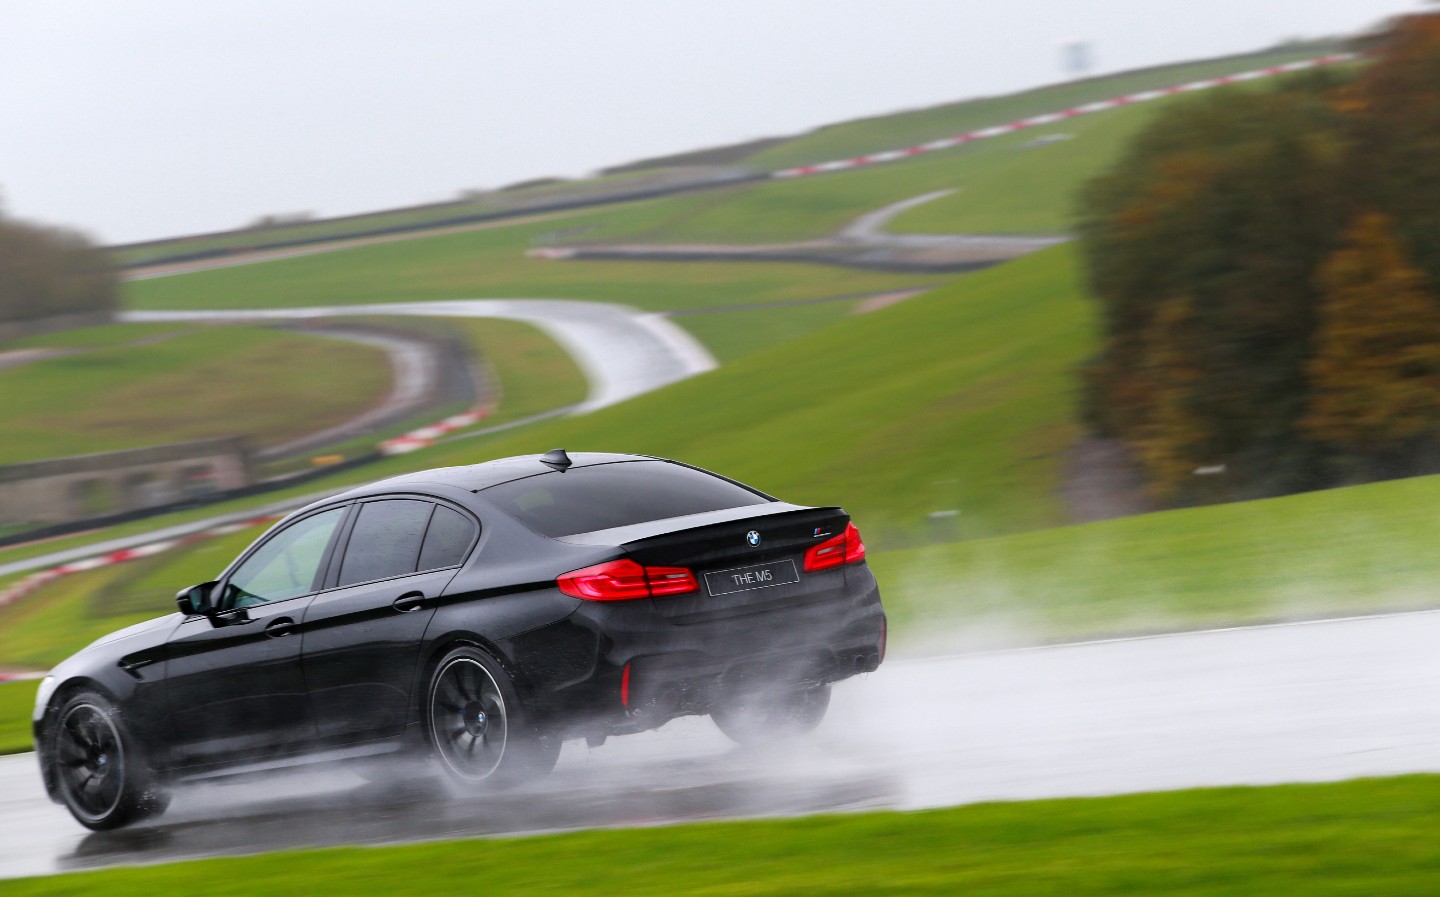 BMW M Driving Experience review by Will Dron for Sunday Times Driving.co.uk